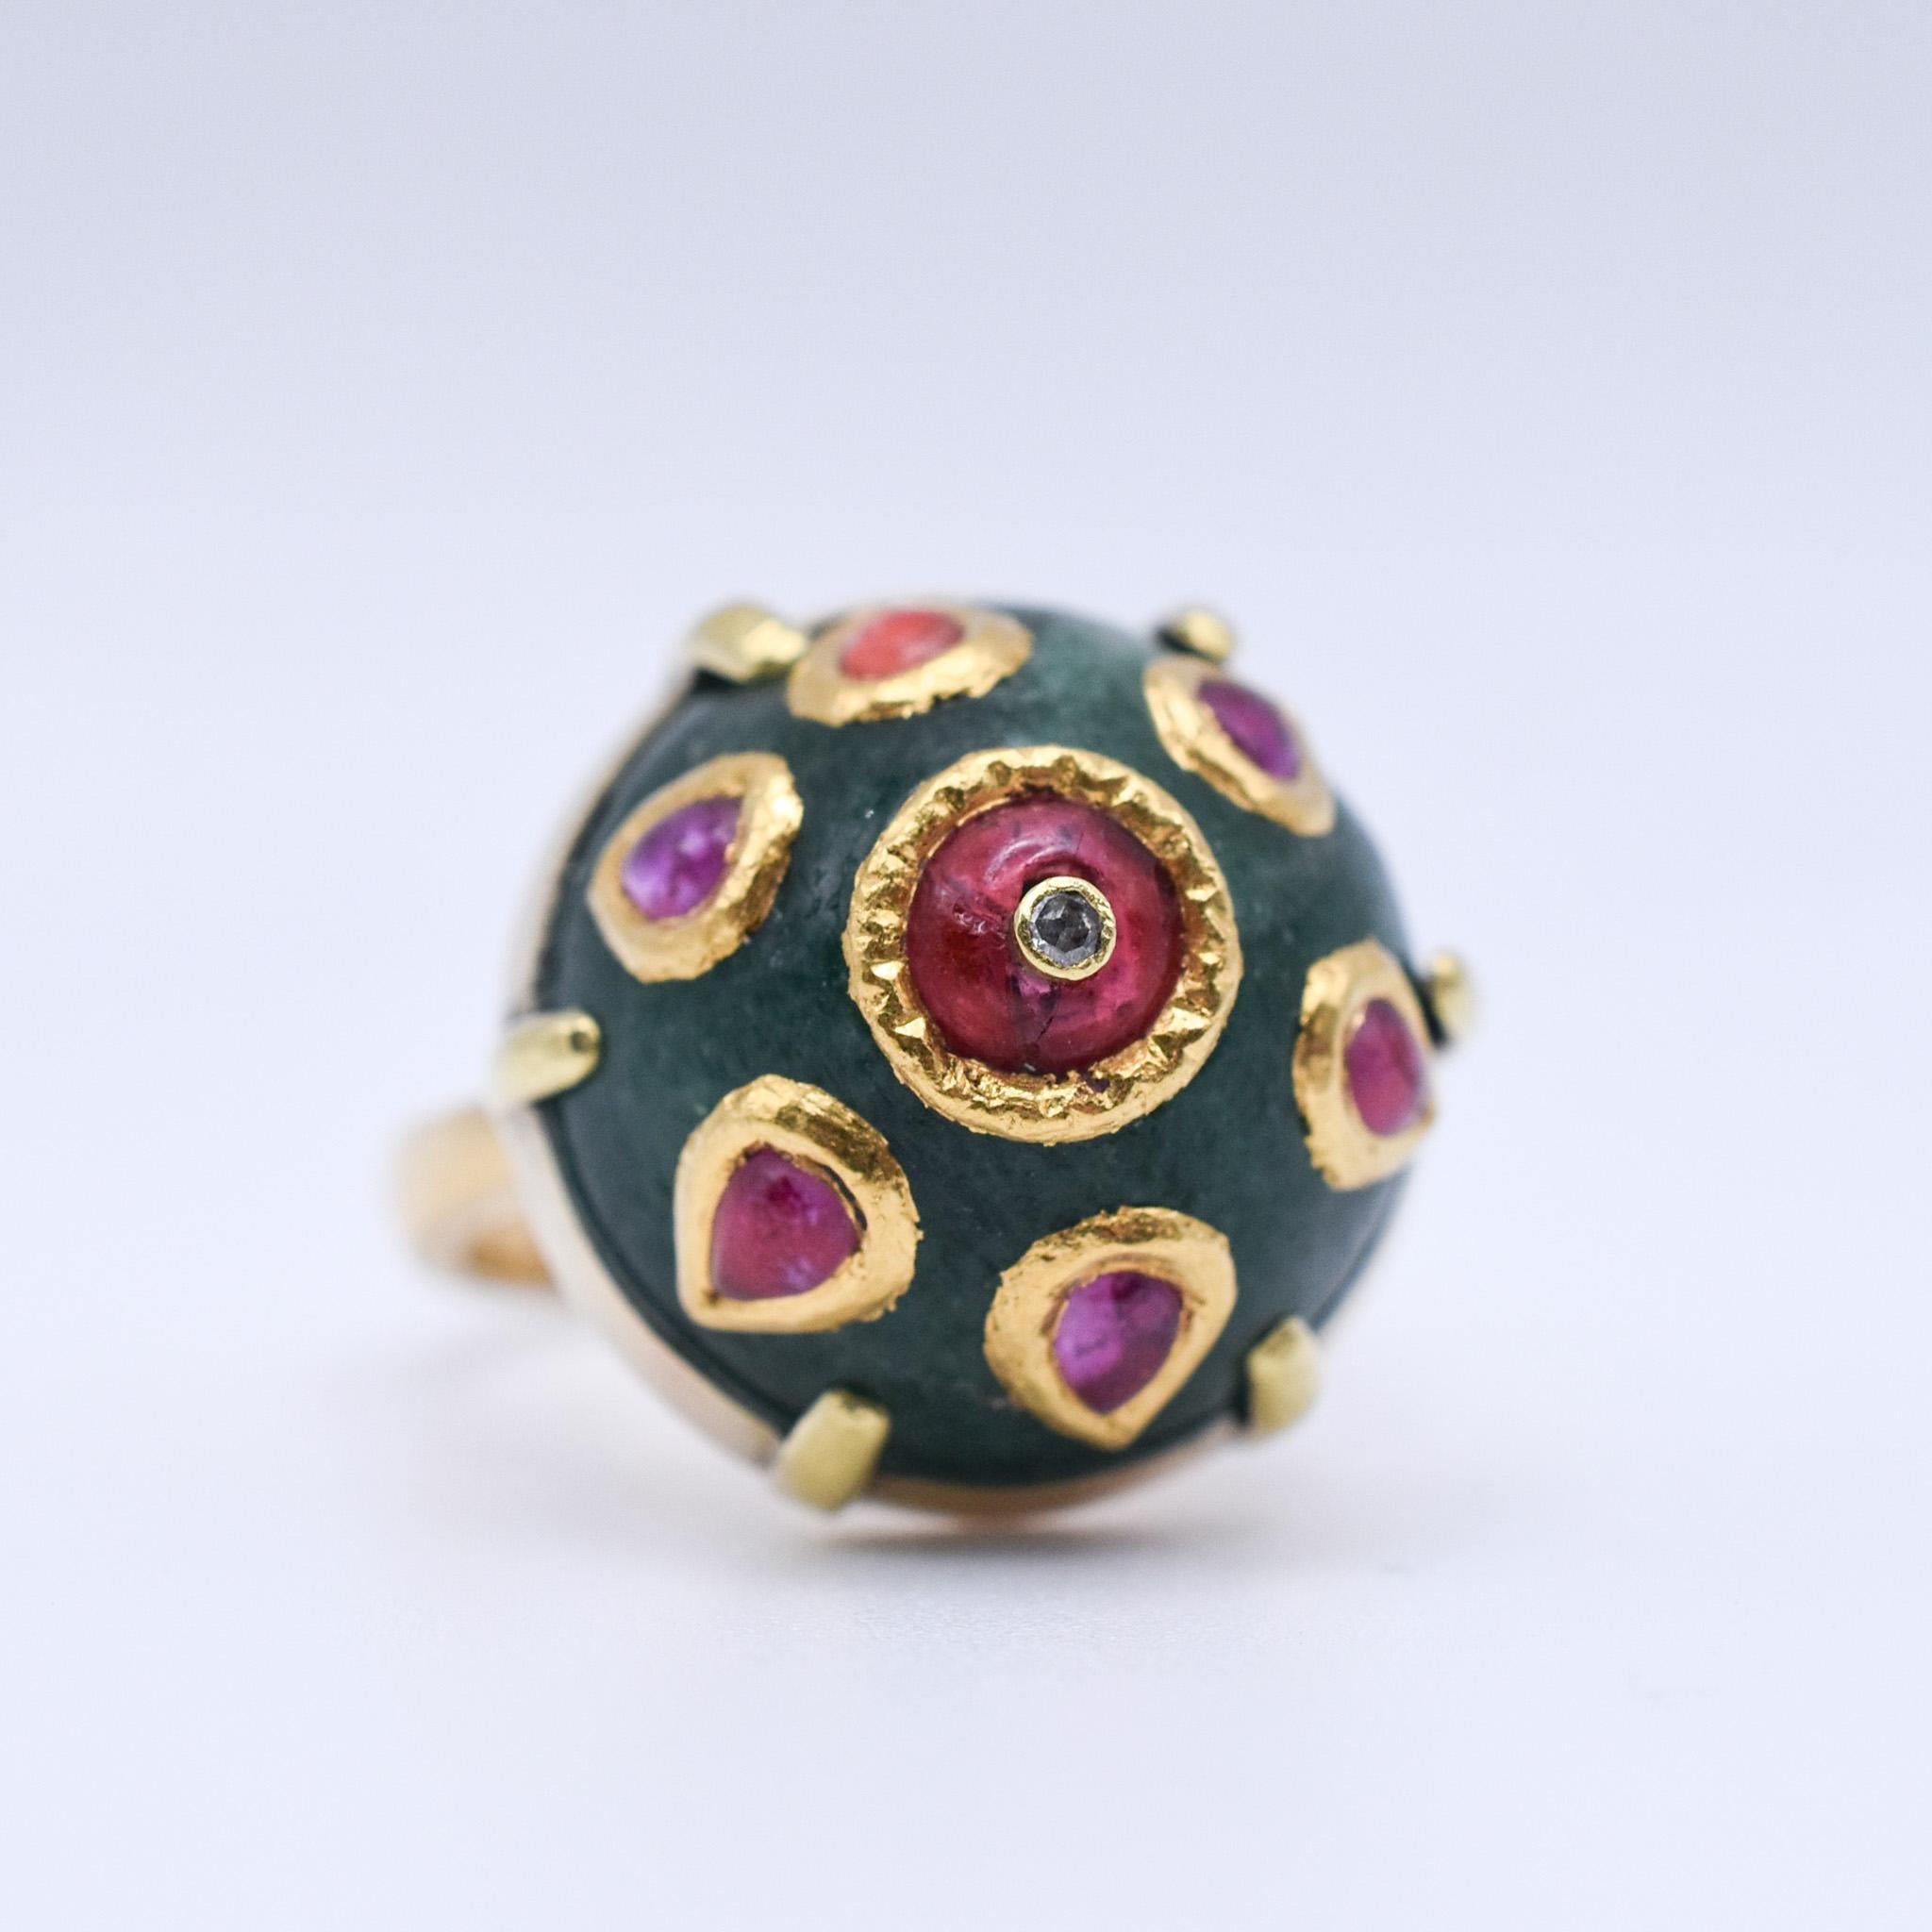 A beautiful Indian Bombe Jade Ring with Ruby accents all over the Dome, mounted in 18k Yellow Gold. Circa 1960.